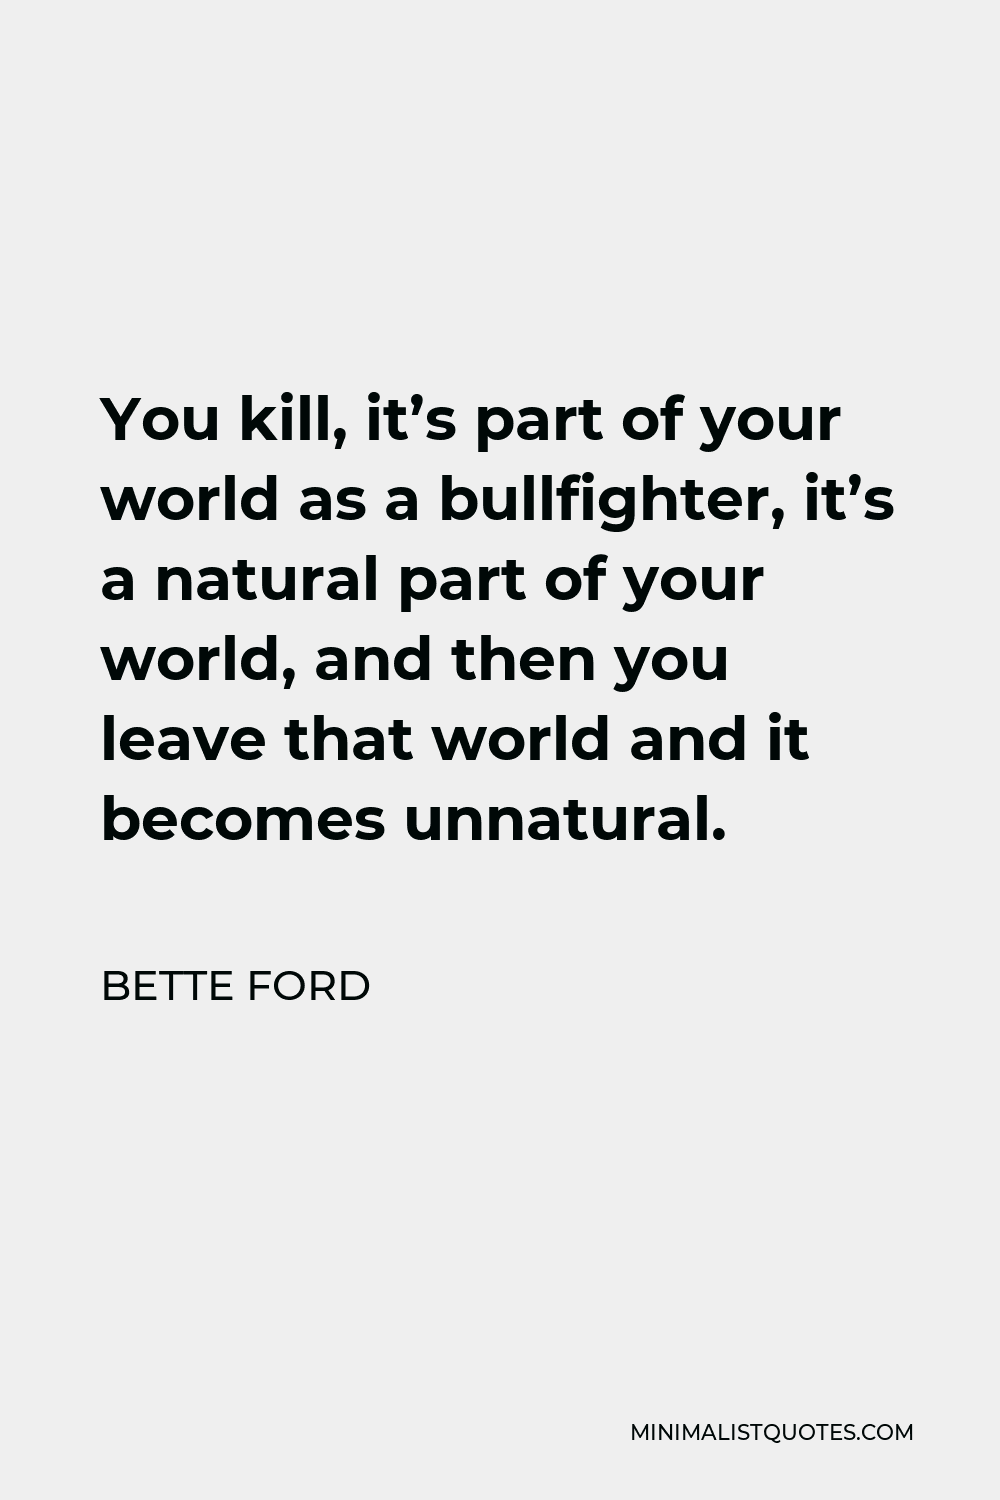 Bette Ford Quote - You kill, it’s part of your world as a bullfighter, it’s a natural part of your world, and then you leave that world and it becomes unnatural.